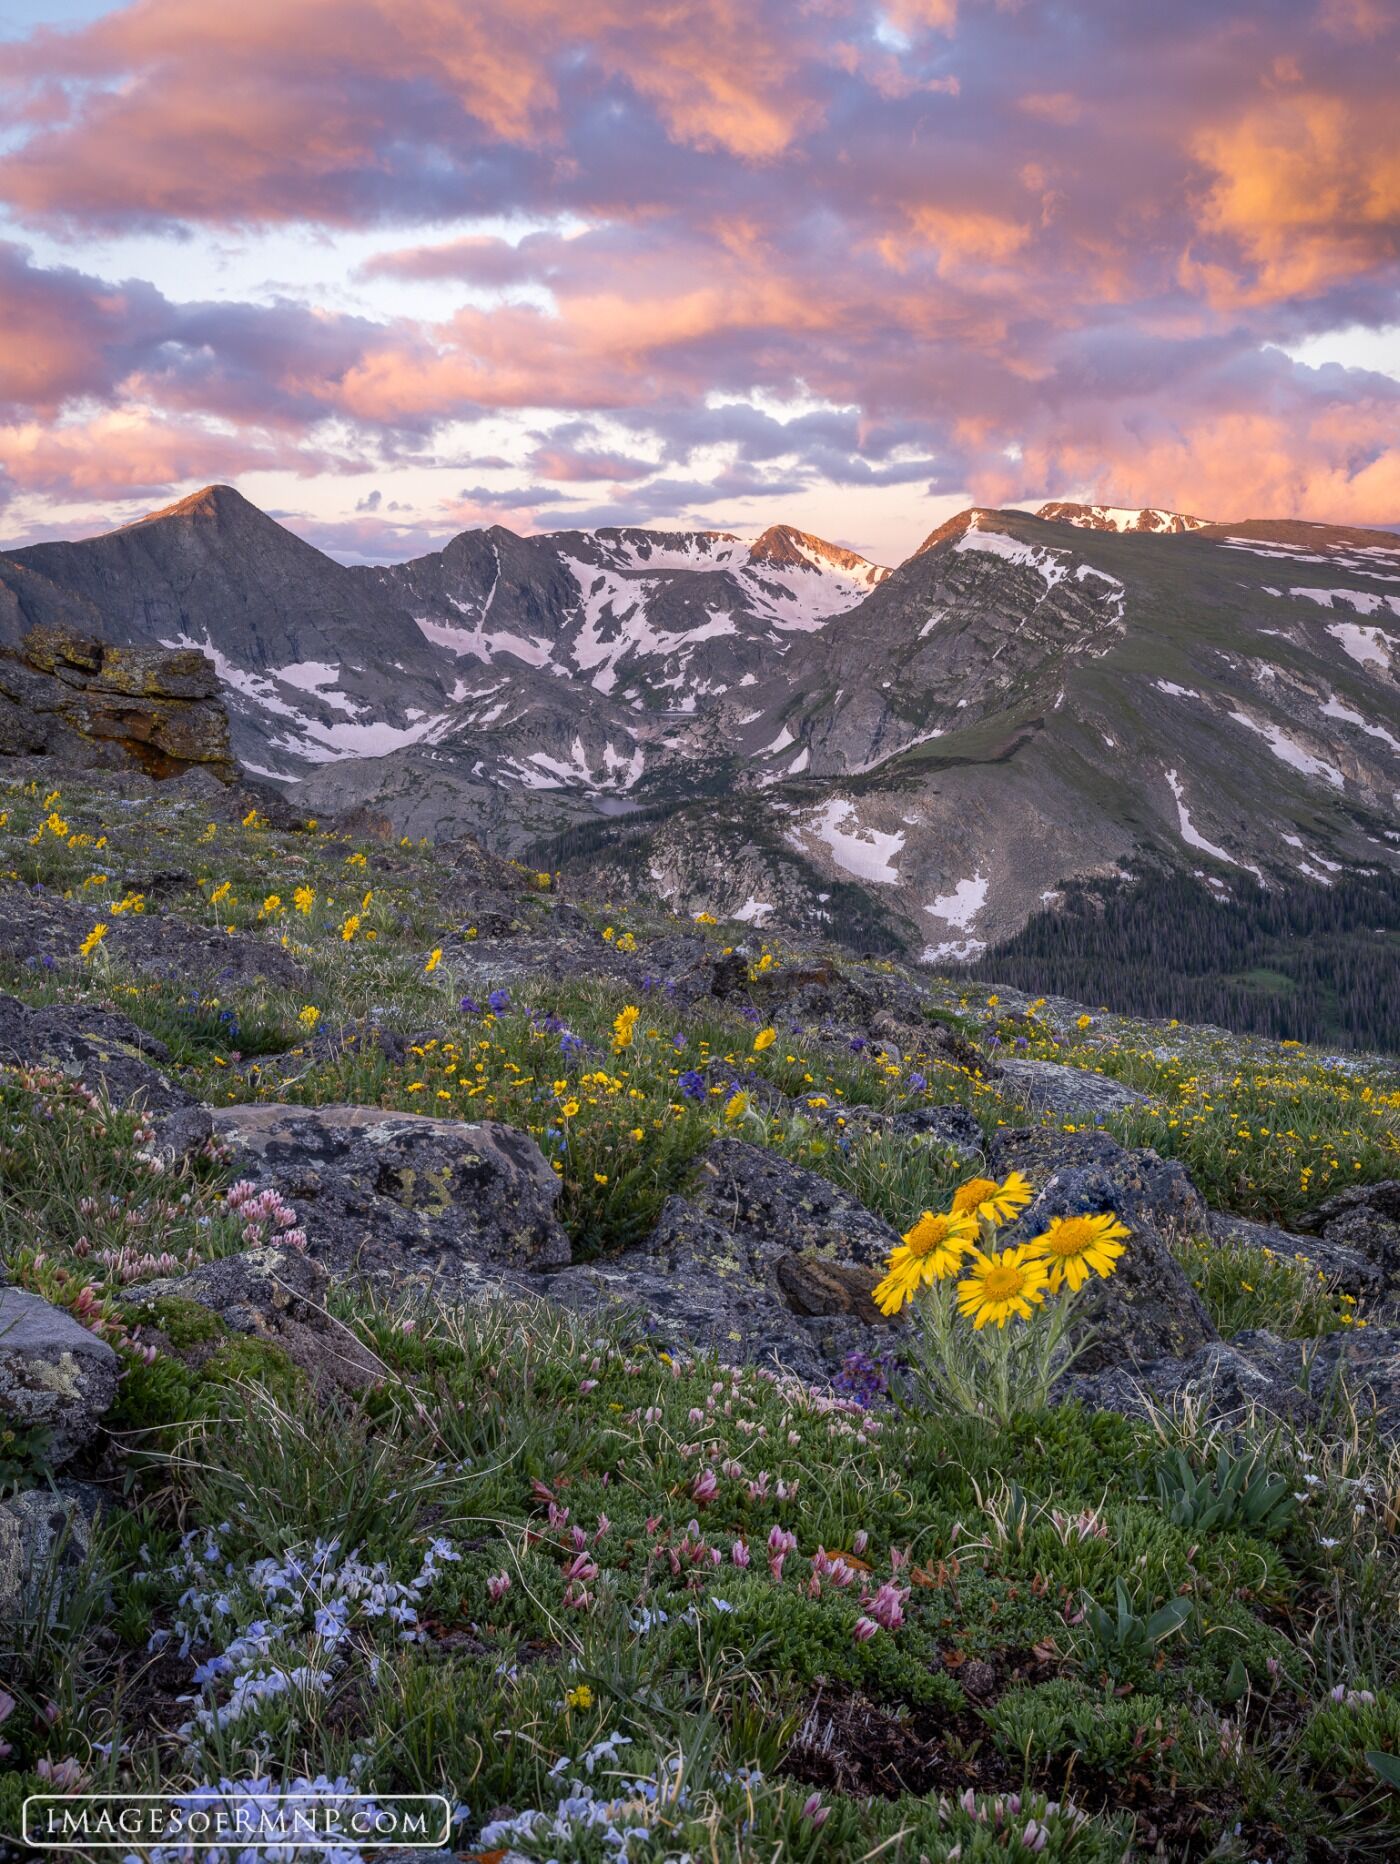 In mid-summer, wildflowers of every color fill the tundra with their vibrant petals and sweet aromas. Sometimes it seems as if...